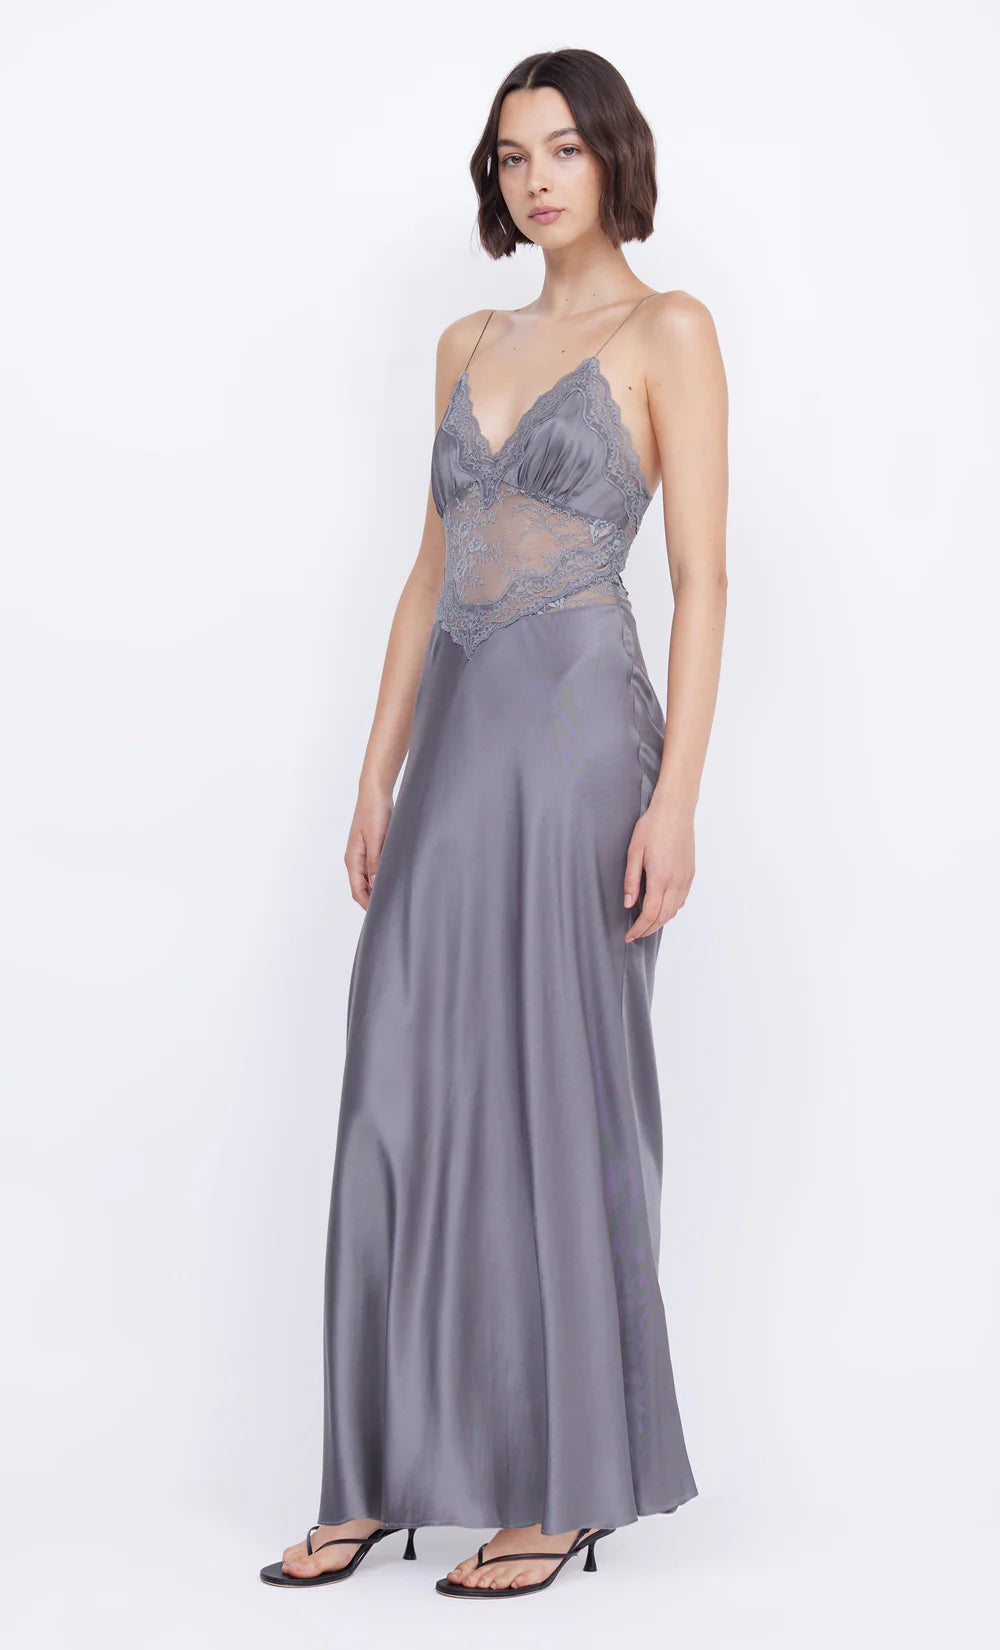 AMORAS GOWN